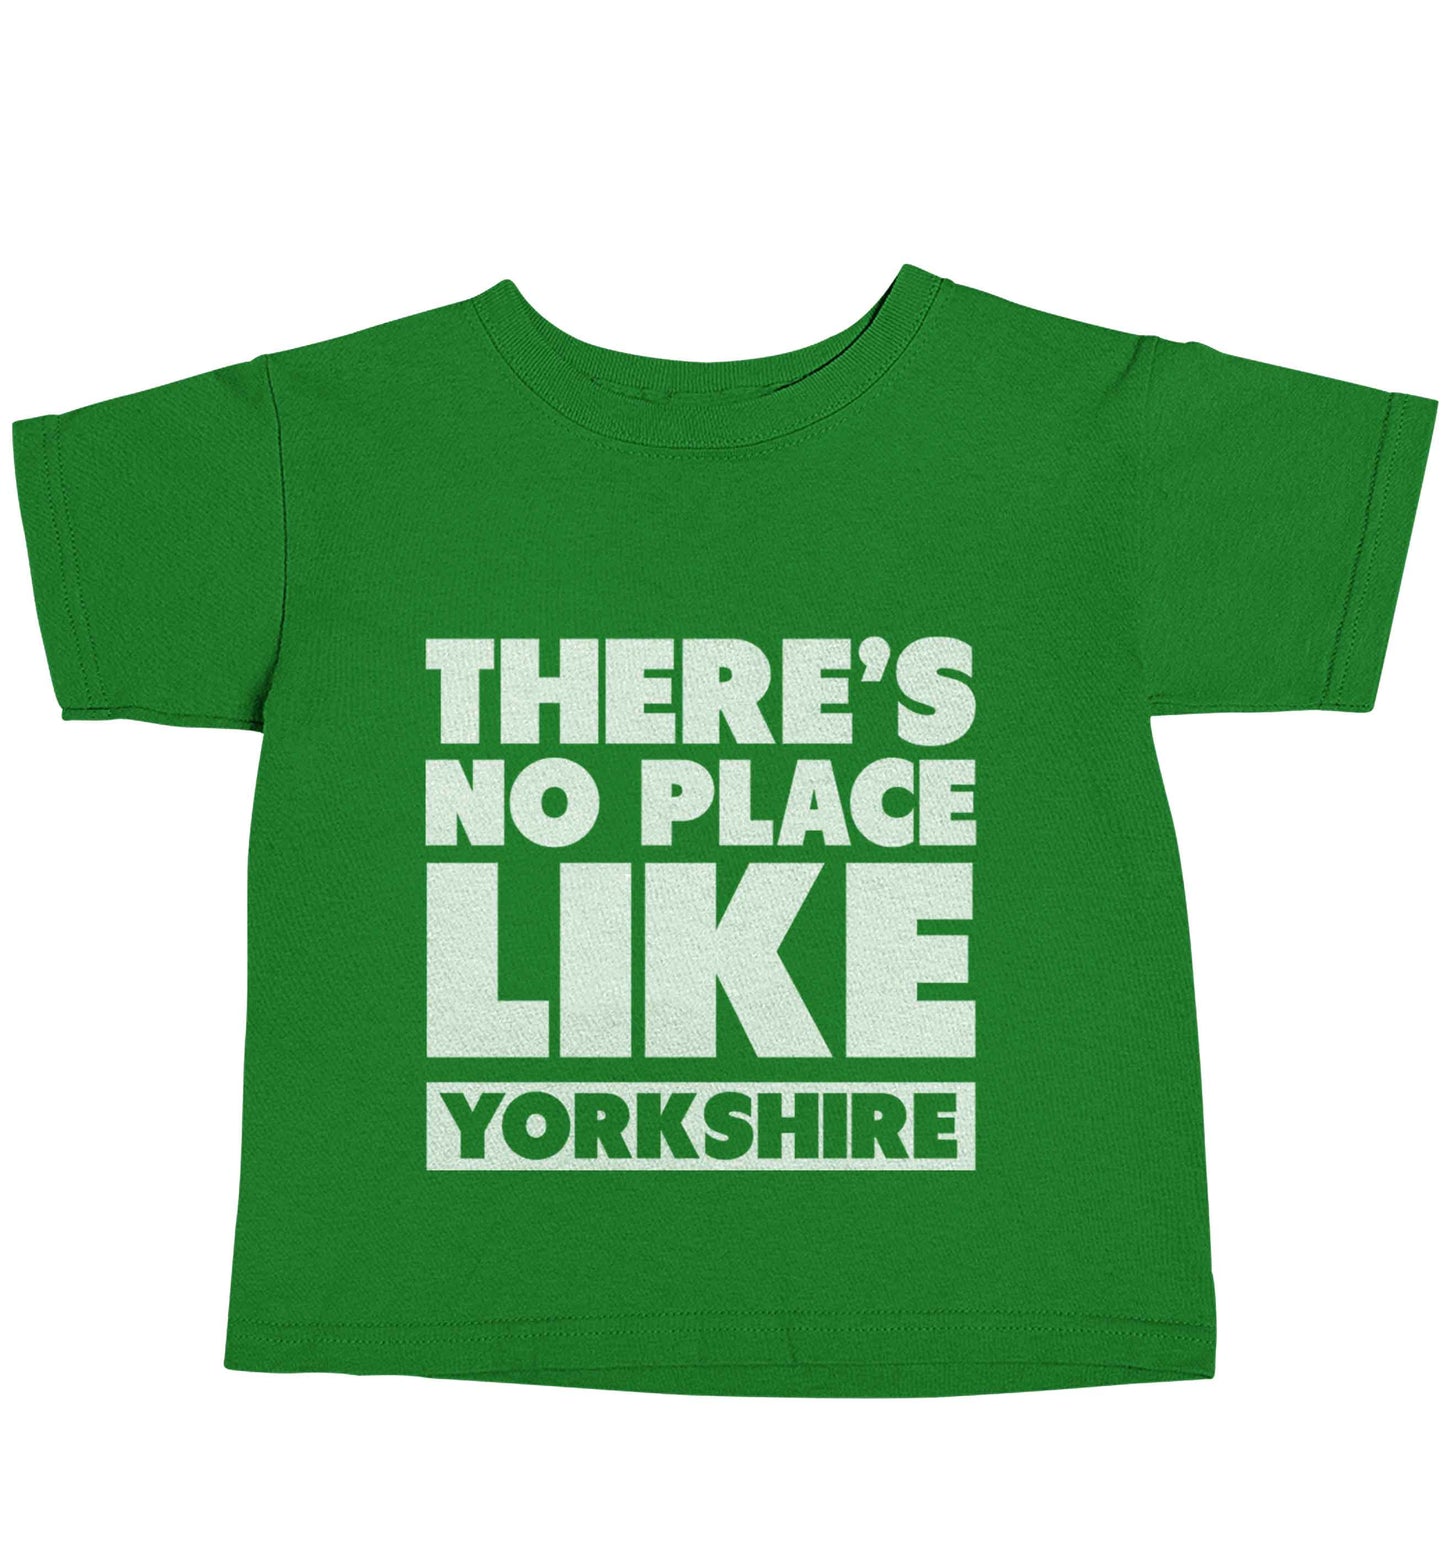 There's no place like Yorkshire green baby toddler Tshirt 2 Years